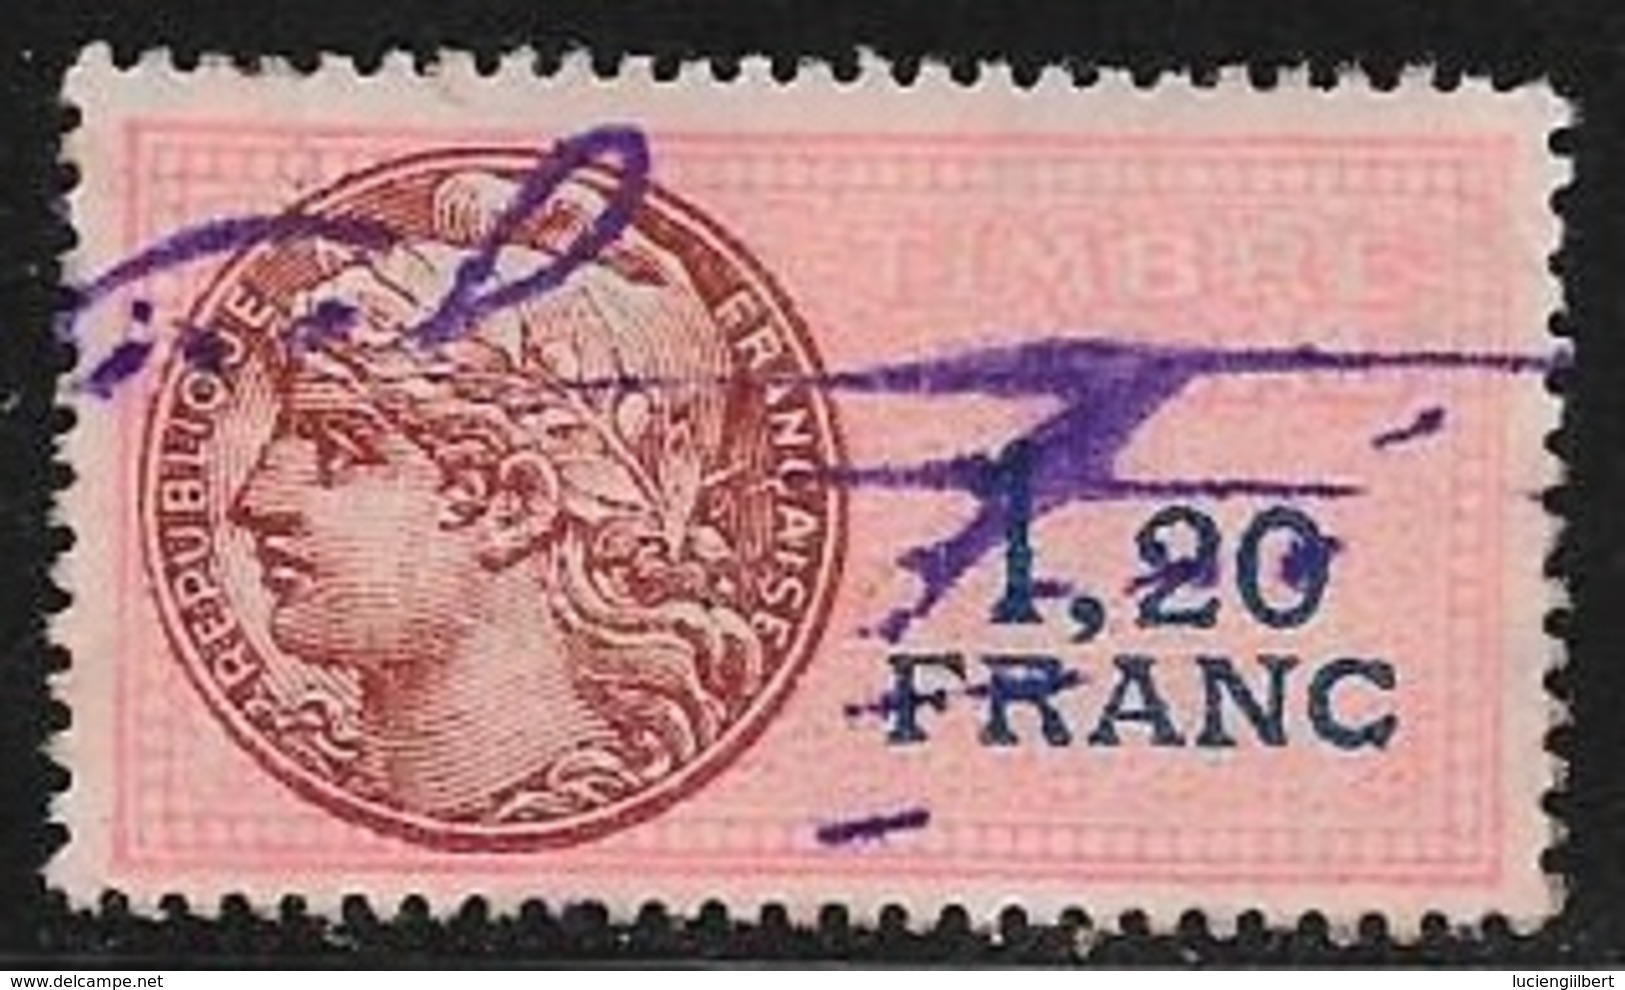 TIMBRE FISCAL N° 121  -  1 F 20   BLEU SUR ROUGE  -   MEDAILLON DAUSSY ETOILE  -   OBLITERE - Timbres